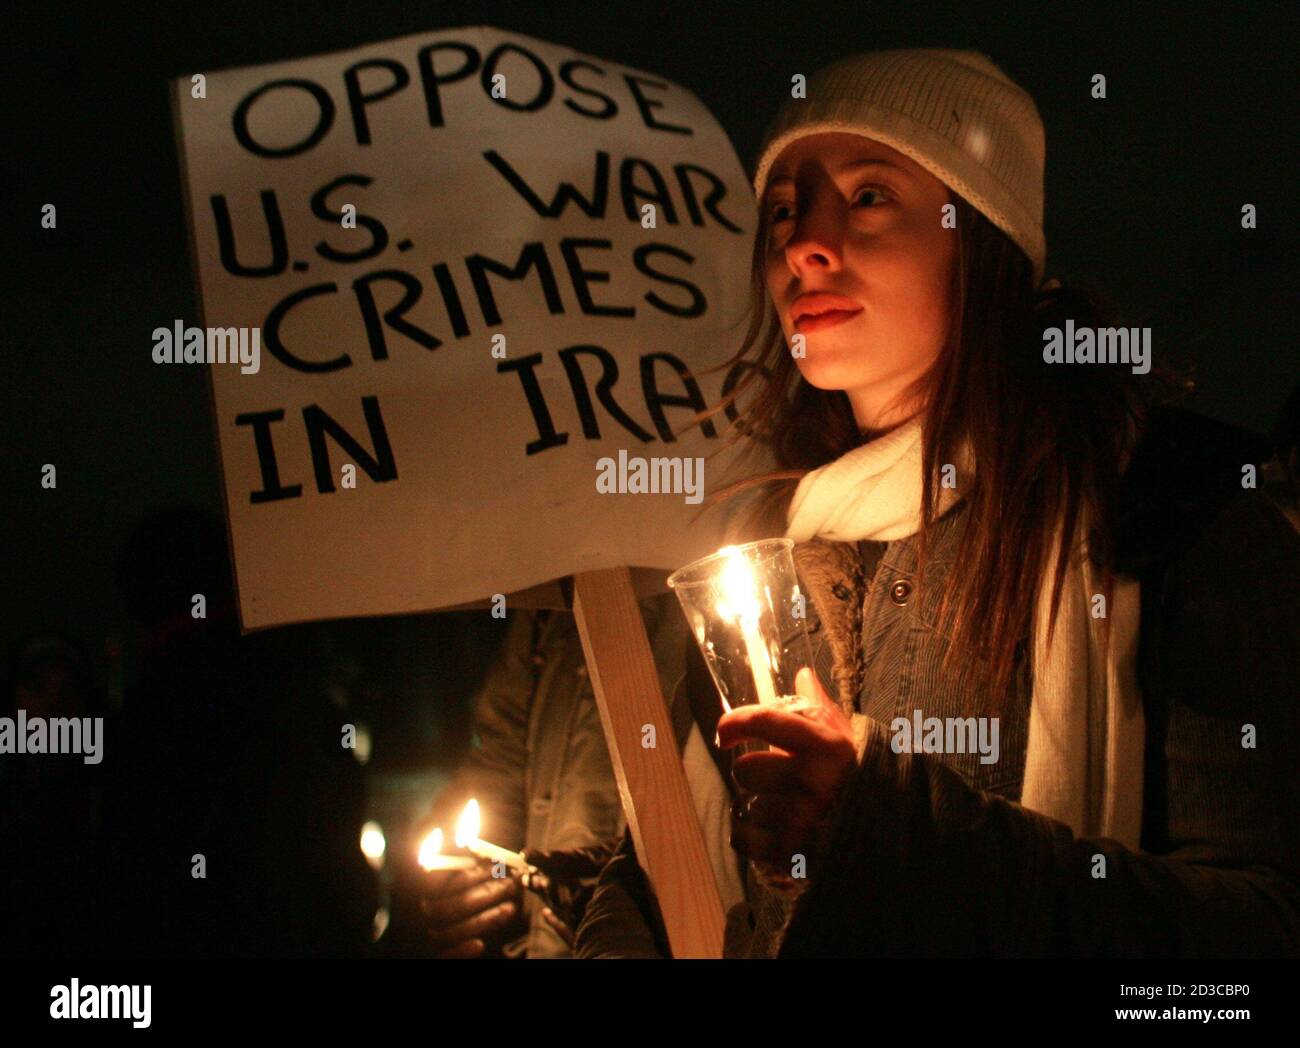 Kelly Gallagher of Montreal takes part in a candlelight vigil against the war in Iraq on Parliament Hill in Ottawa, November 30, 2004. The vigil was part of a day of protests against the visit of U.S. President George w.Bush. REUTERS/Christinne Muschi  PJ Stock Photo